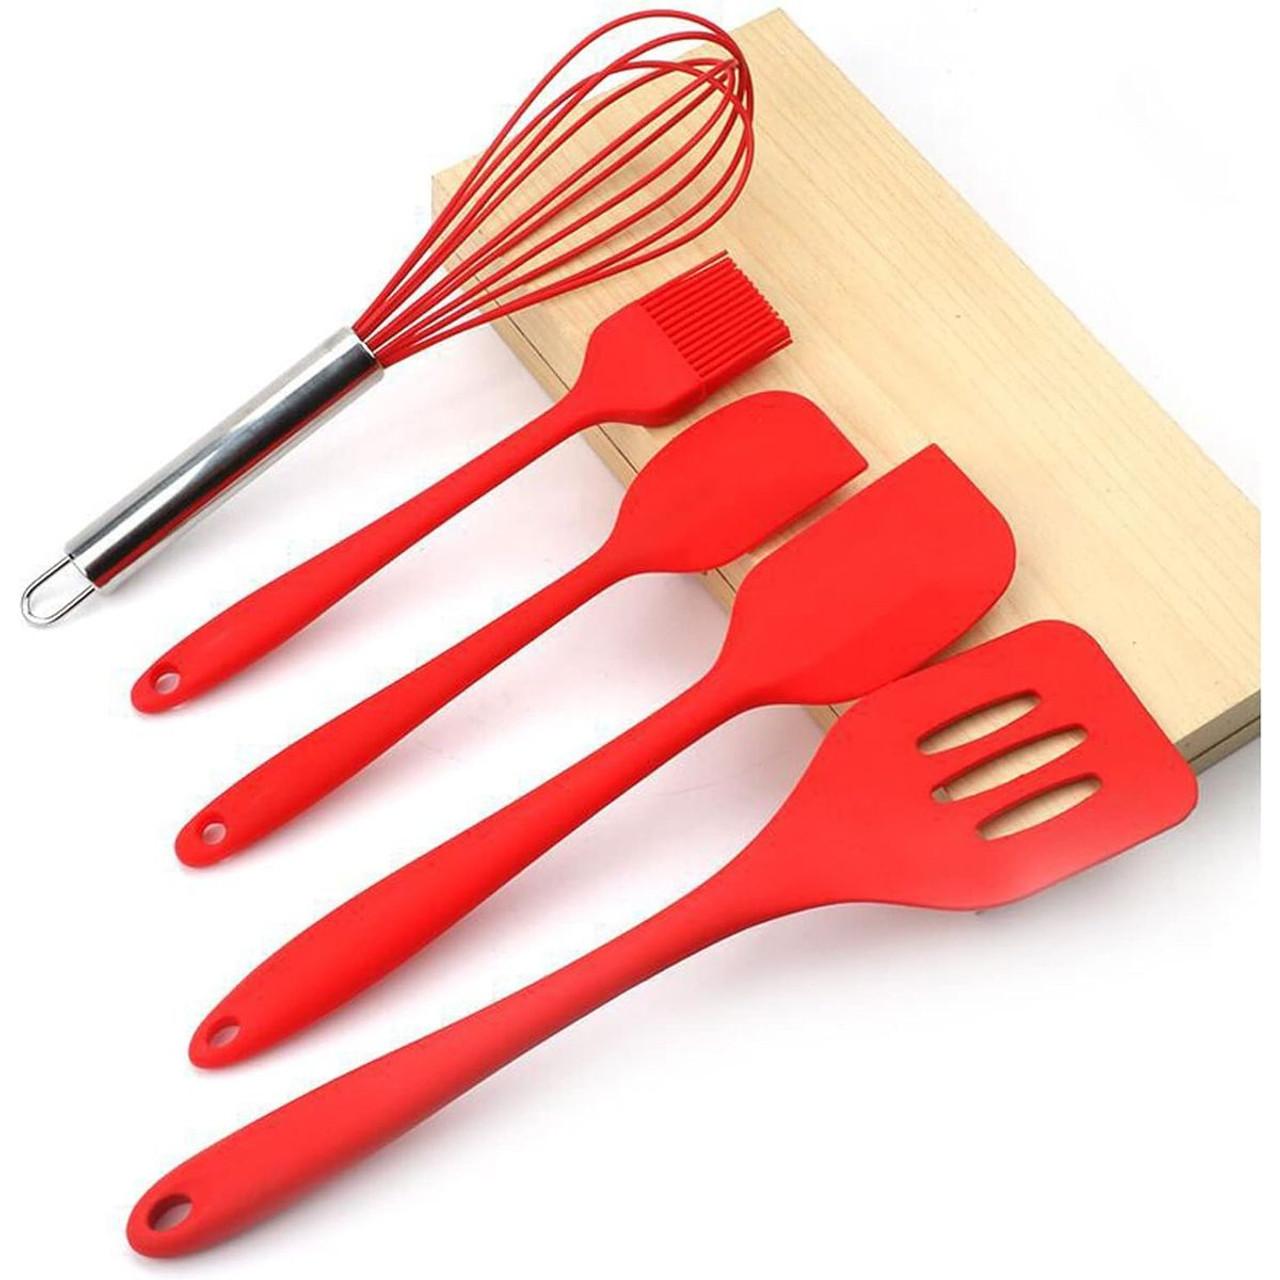 Kitchen Silicone Cooking Utensils (Set of 5) product image